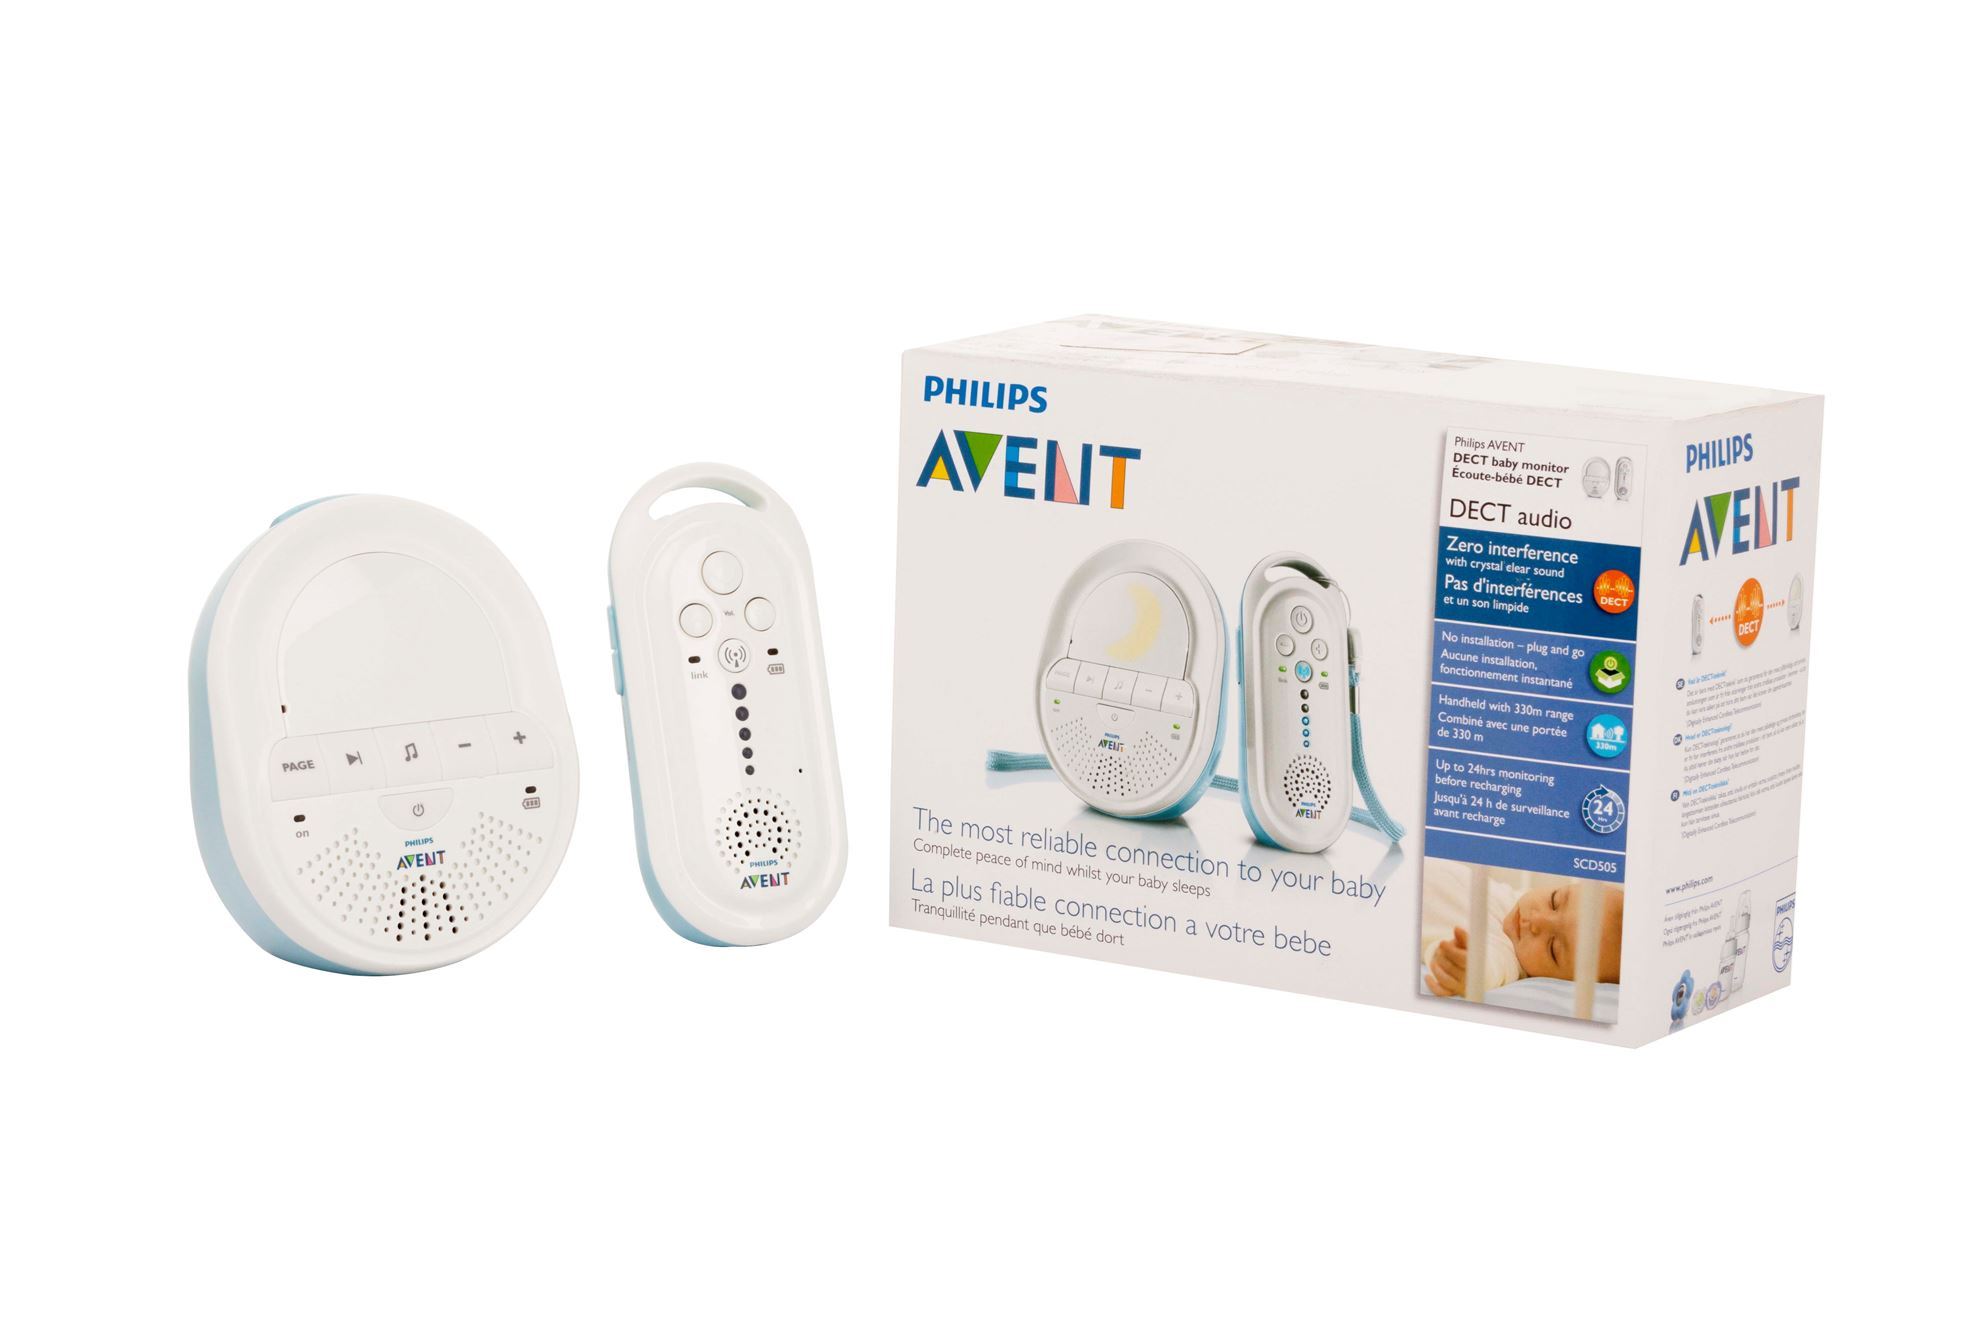 Dr. Sulaiman Al Habib Pharmacy  AVENT 506/05 DECT BABY MONITOR